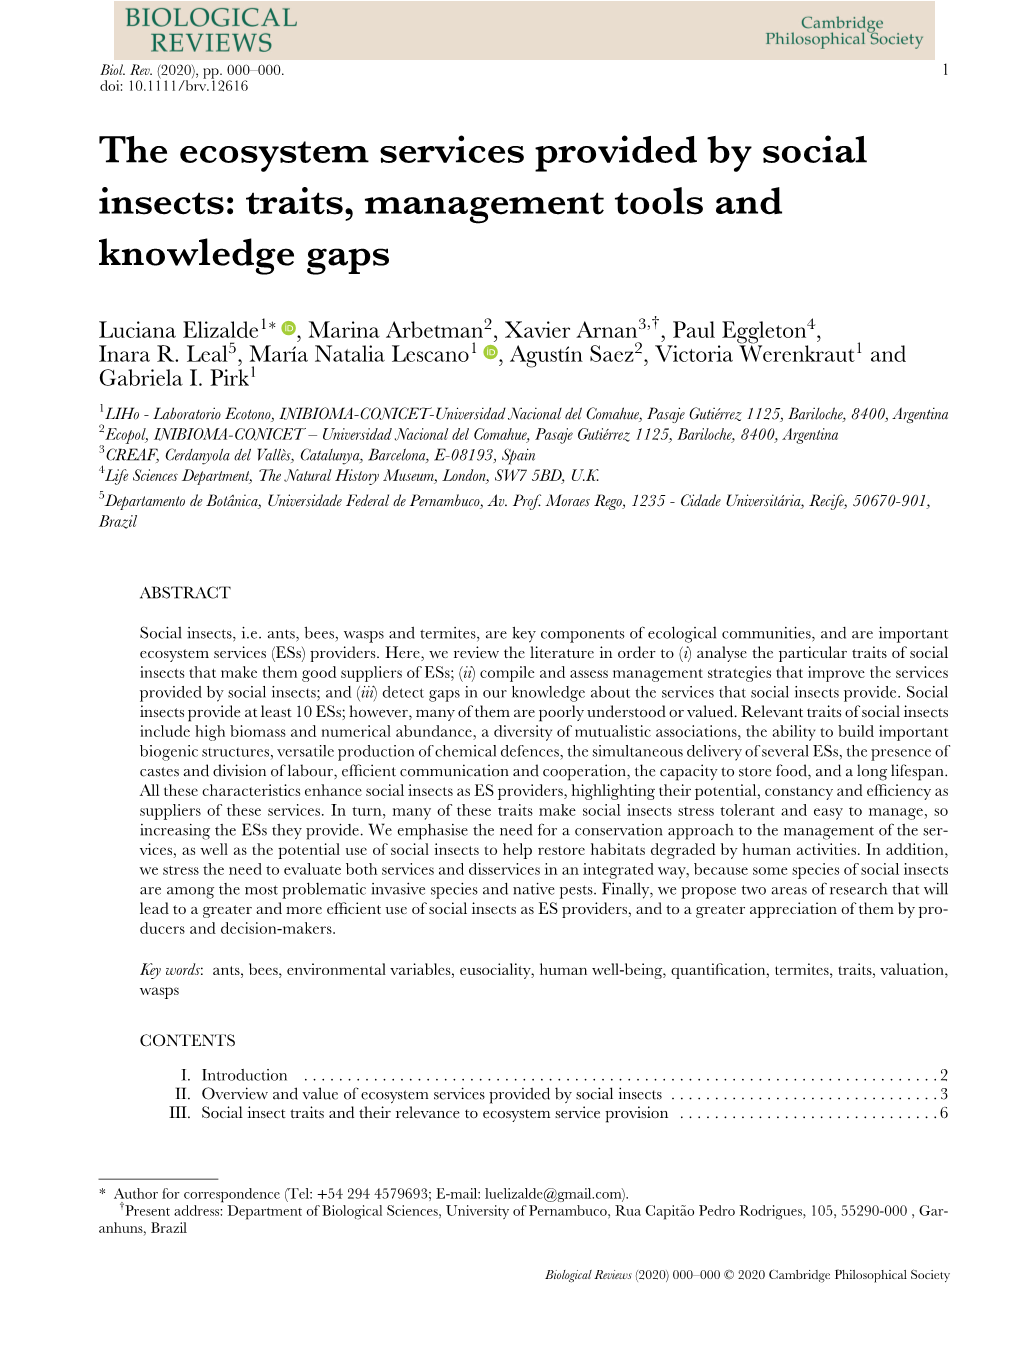 The Ecosystem Services Provided by Social Insects: Traits, Management Tools and Knowledge Gaps